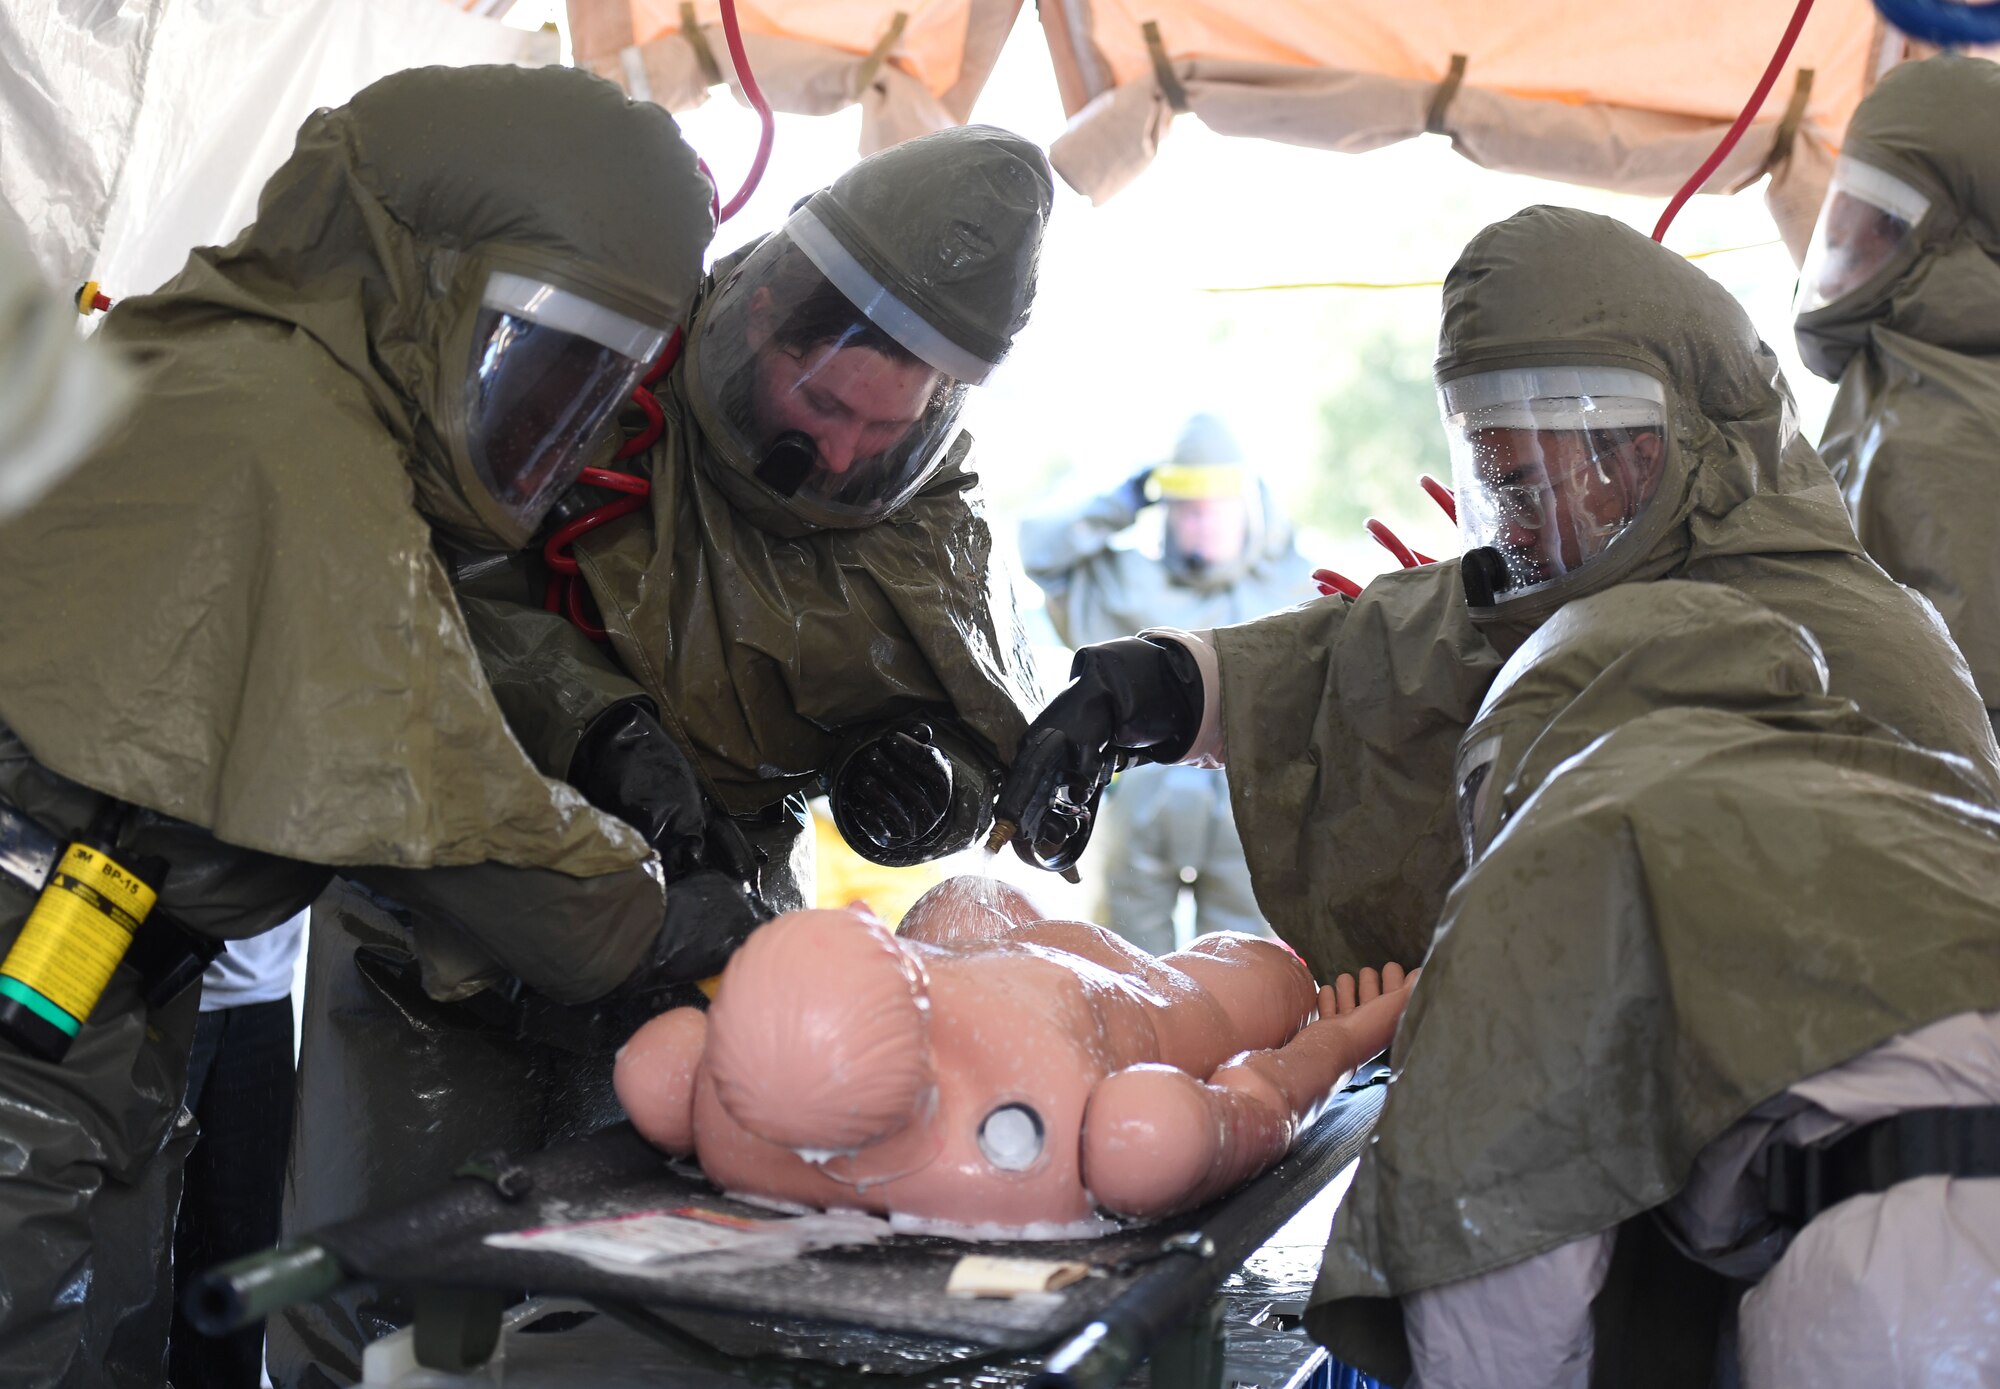 Keesler medics wash a simulated patient during a decontamination training course behind the Keesler Medical Center at Keesler Air Force Base, Mississippi, Jan. 6, 2022. The course provided the tools and skills necessary to maintain an effective level of decontamination operational ability in the event of a chemical, biological, radiological or nuclear incident. (U.S. Air Force photo by Kemberly Groue)